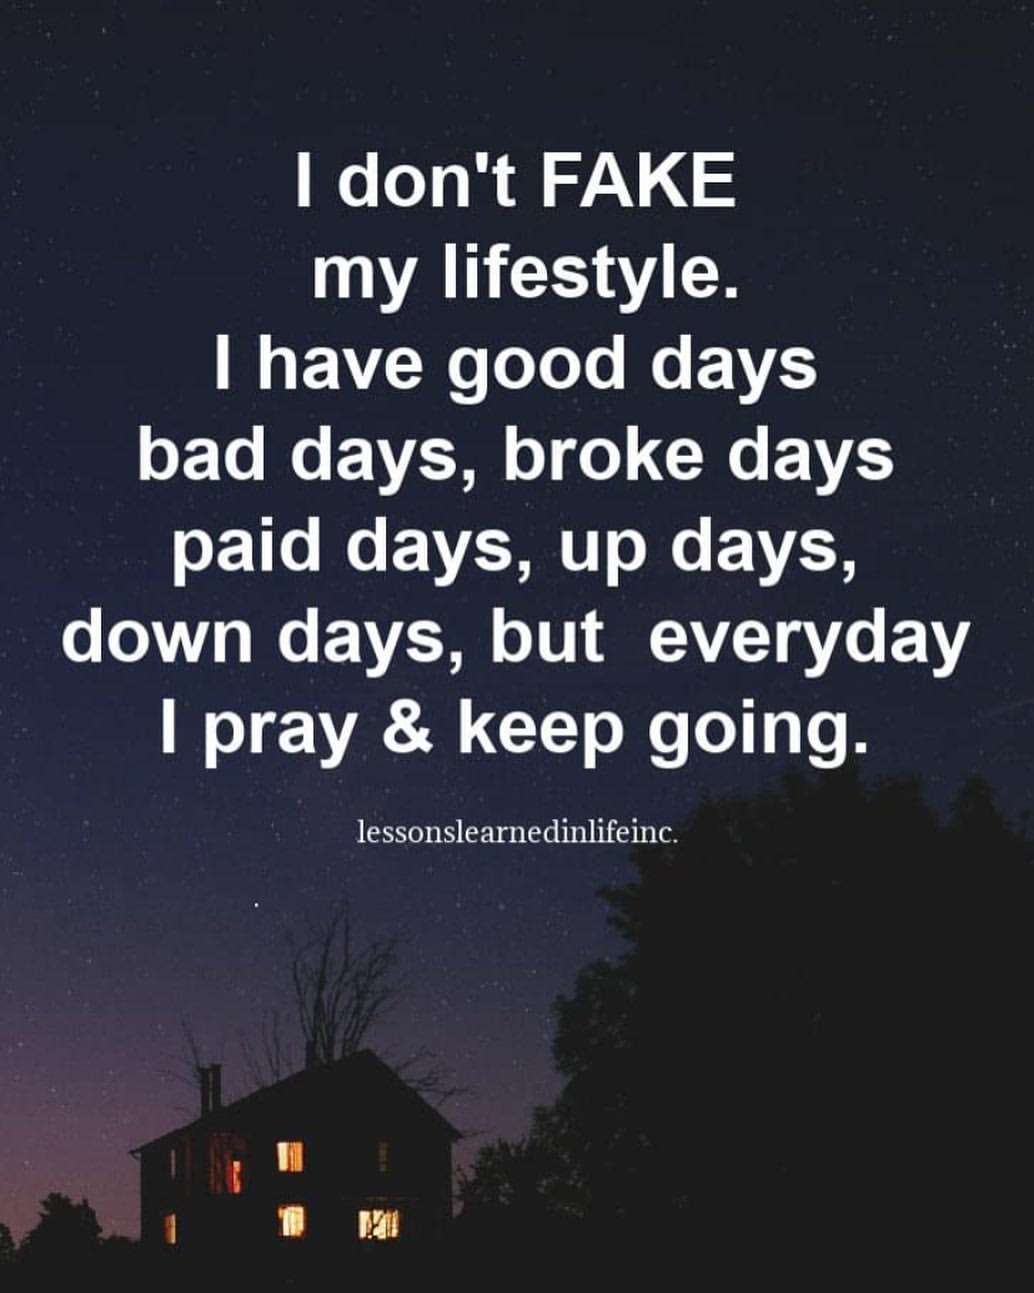 I don't fake my lifestyle. I have good days bad days, broke days paid days, up days, down days, but everyday I pray & keep going.